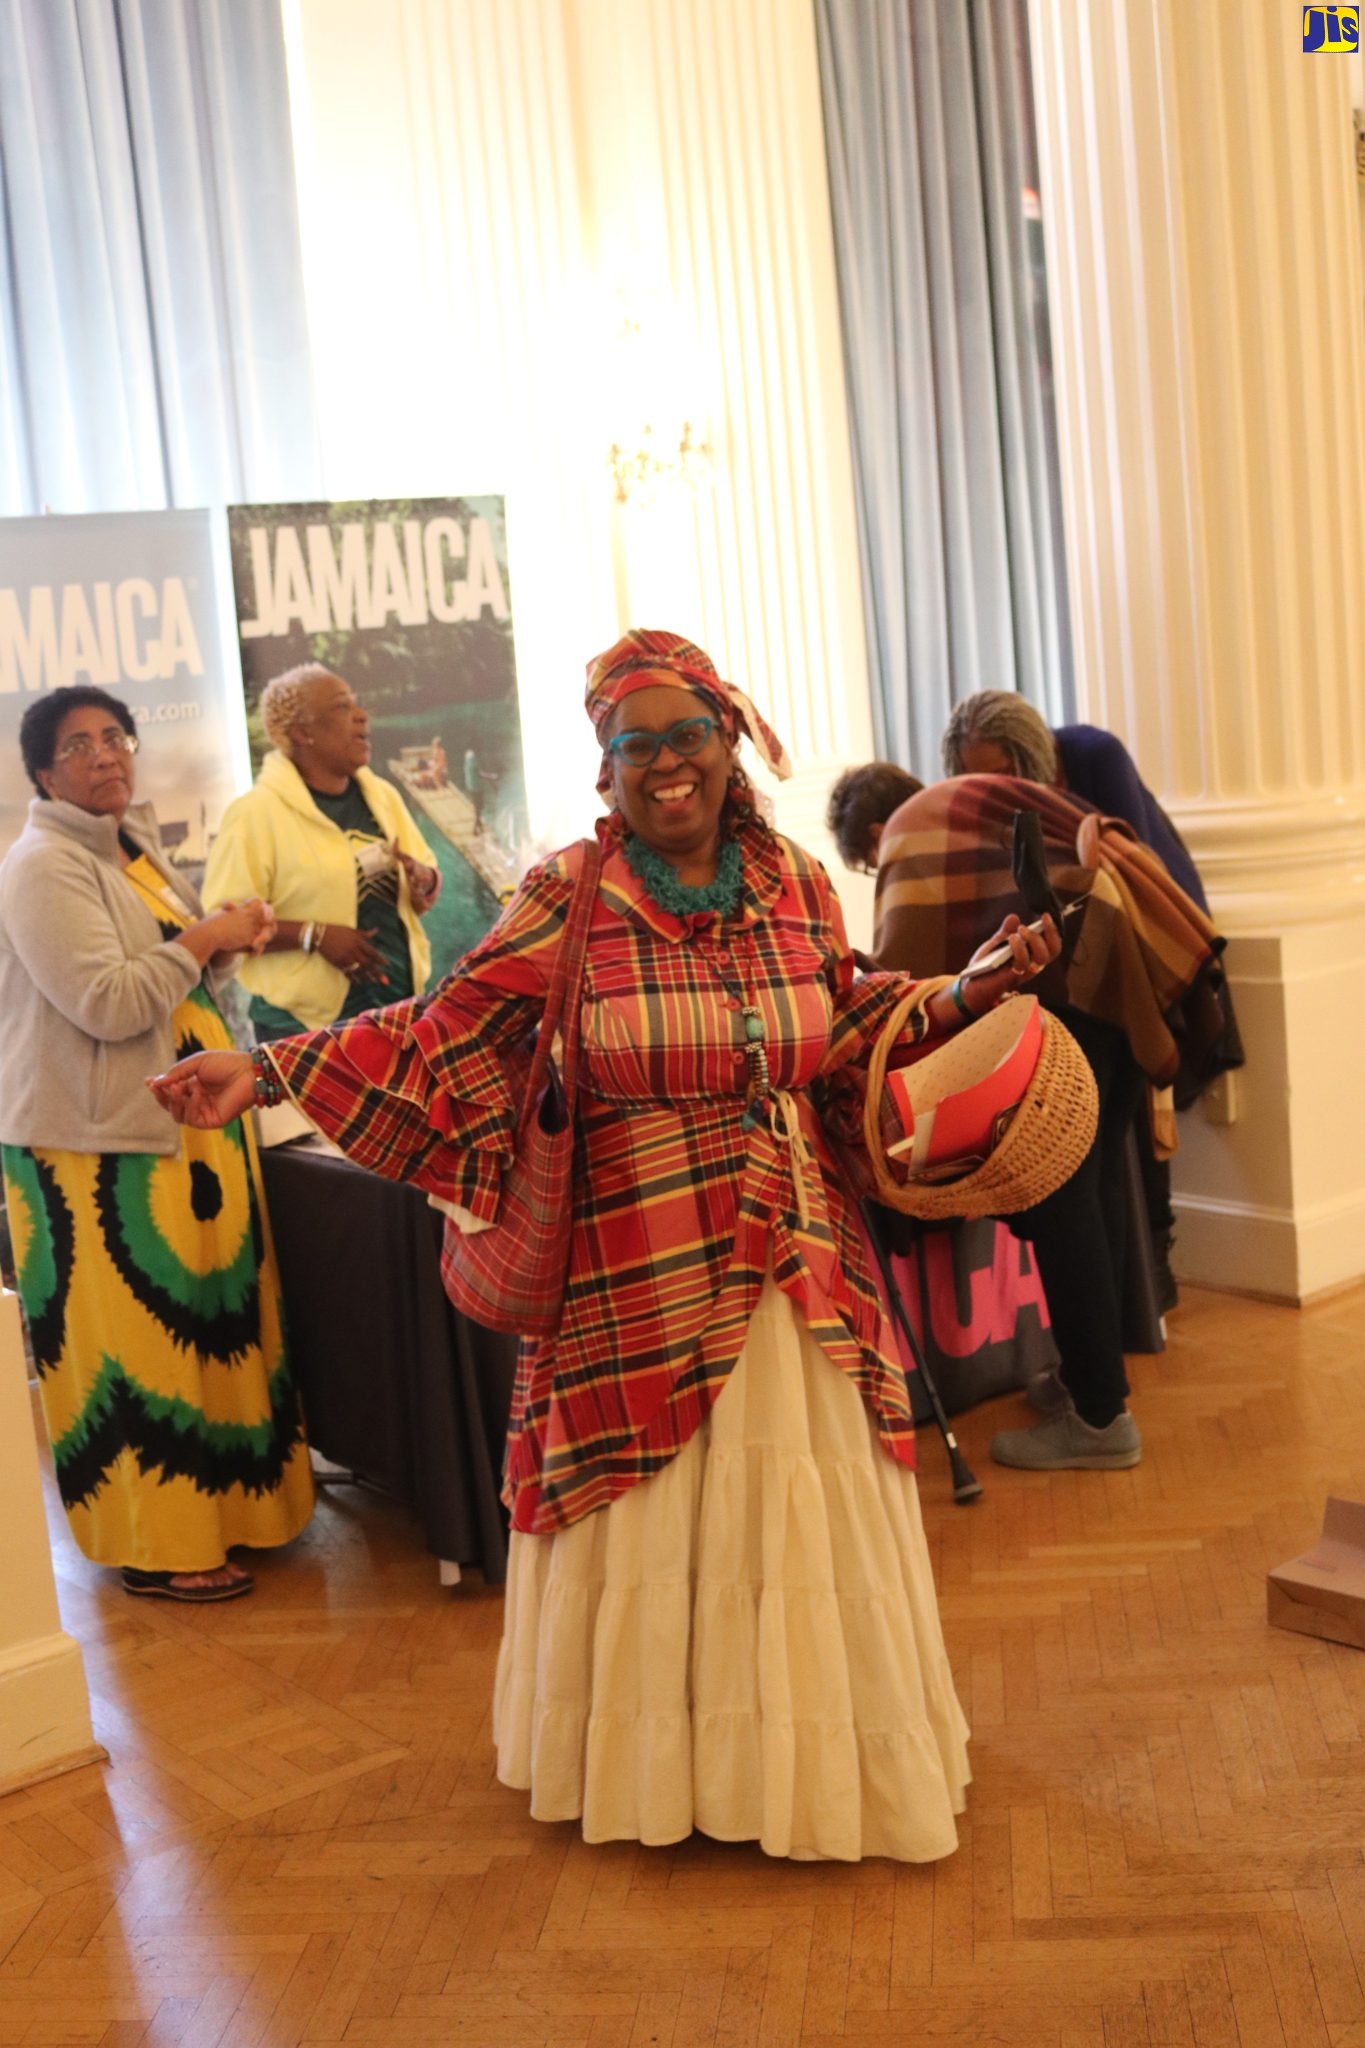 13 Things to Know about the Jamaican National Costume